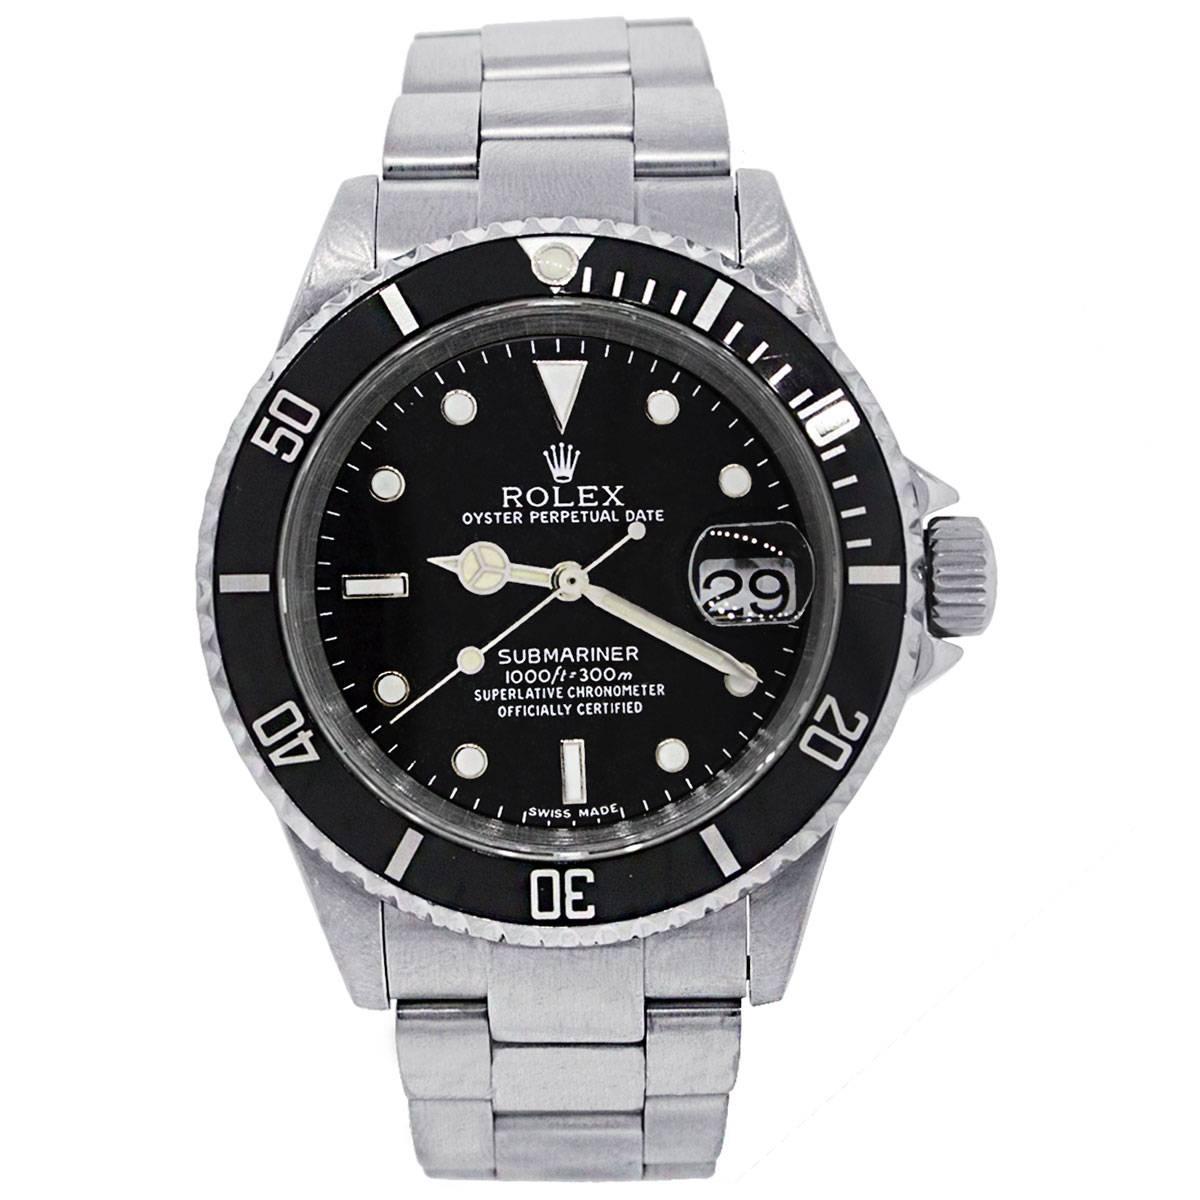 Brand: Rolex
MPN: 16610
Model: Submariner
Case Material: Stainless steel
Case Diameter: 40mm
Crystal: Sapphire crystal (scratch resistant)
Bezel: Unidirectional black bezel
Dial: Black dial with luminescent hour markers and date window at the 3